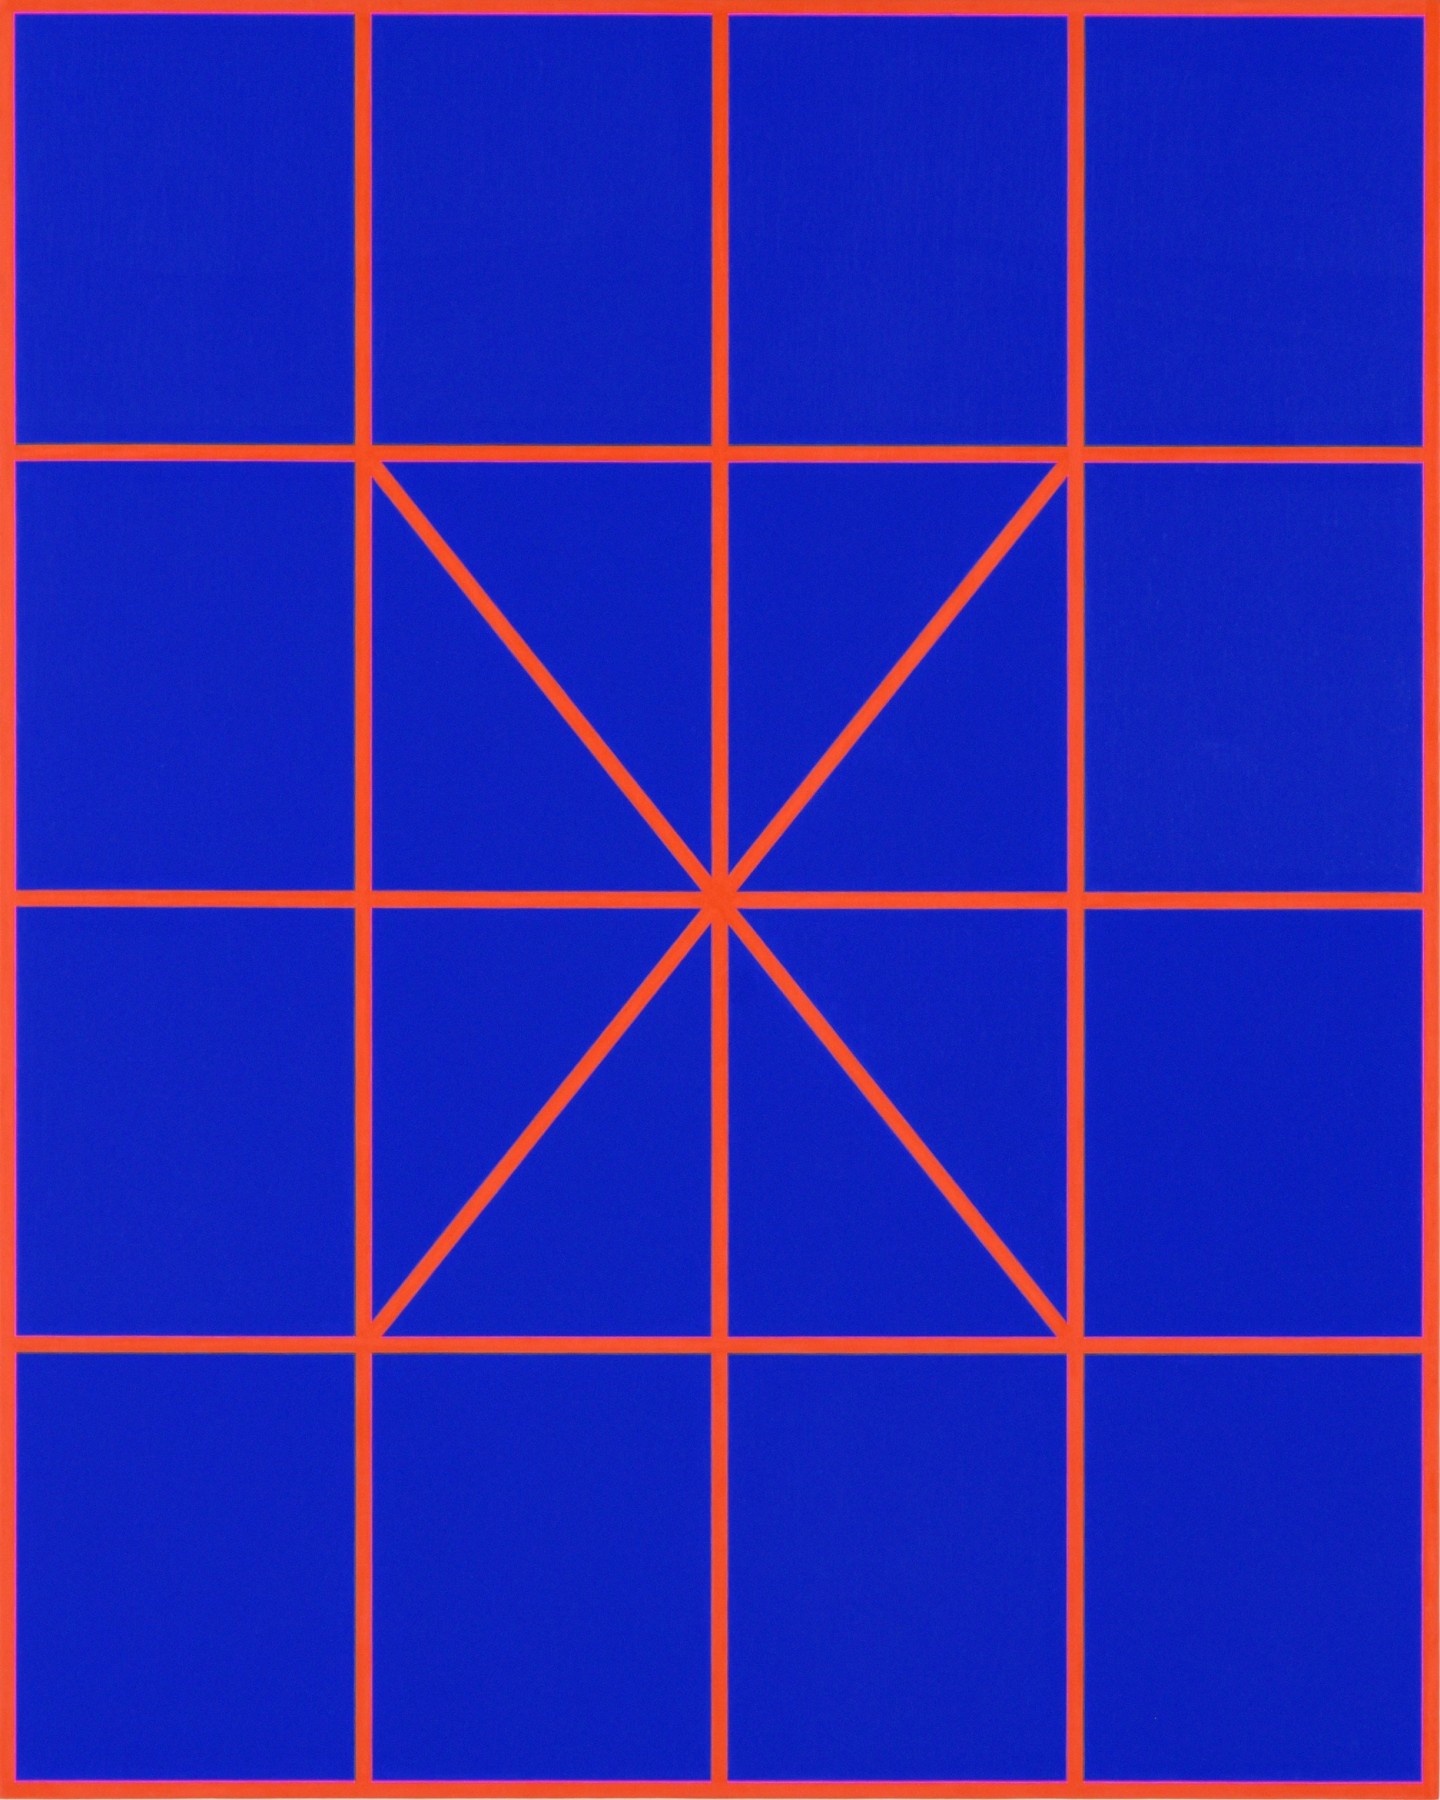 Cary Smith, Complex Diagonals #4 (blue-red), 2017